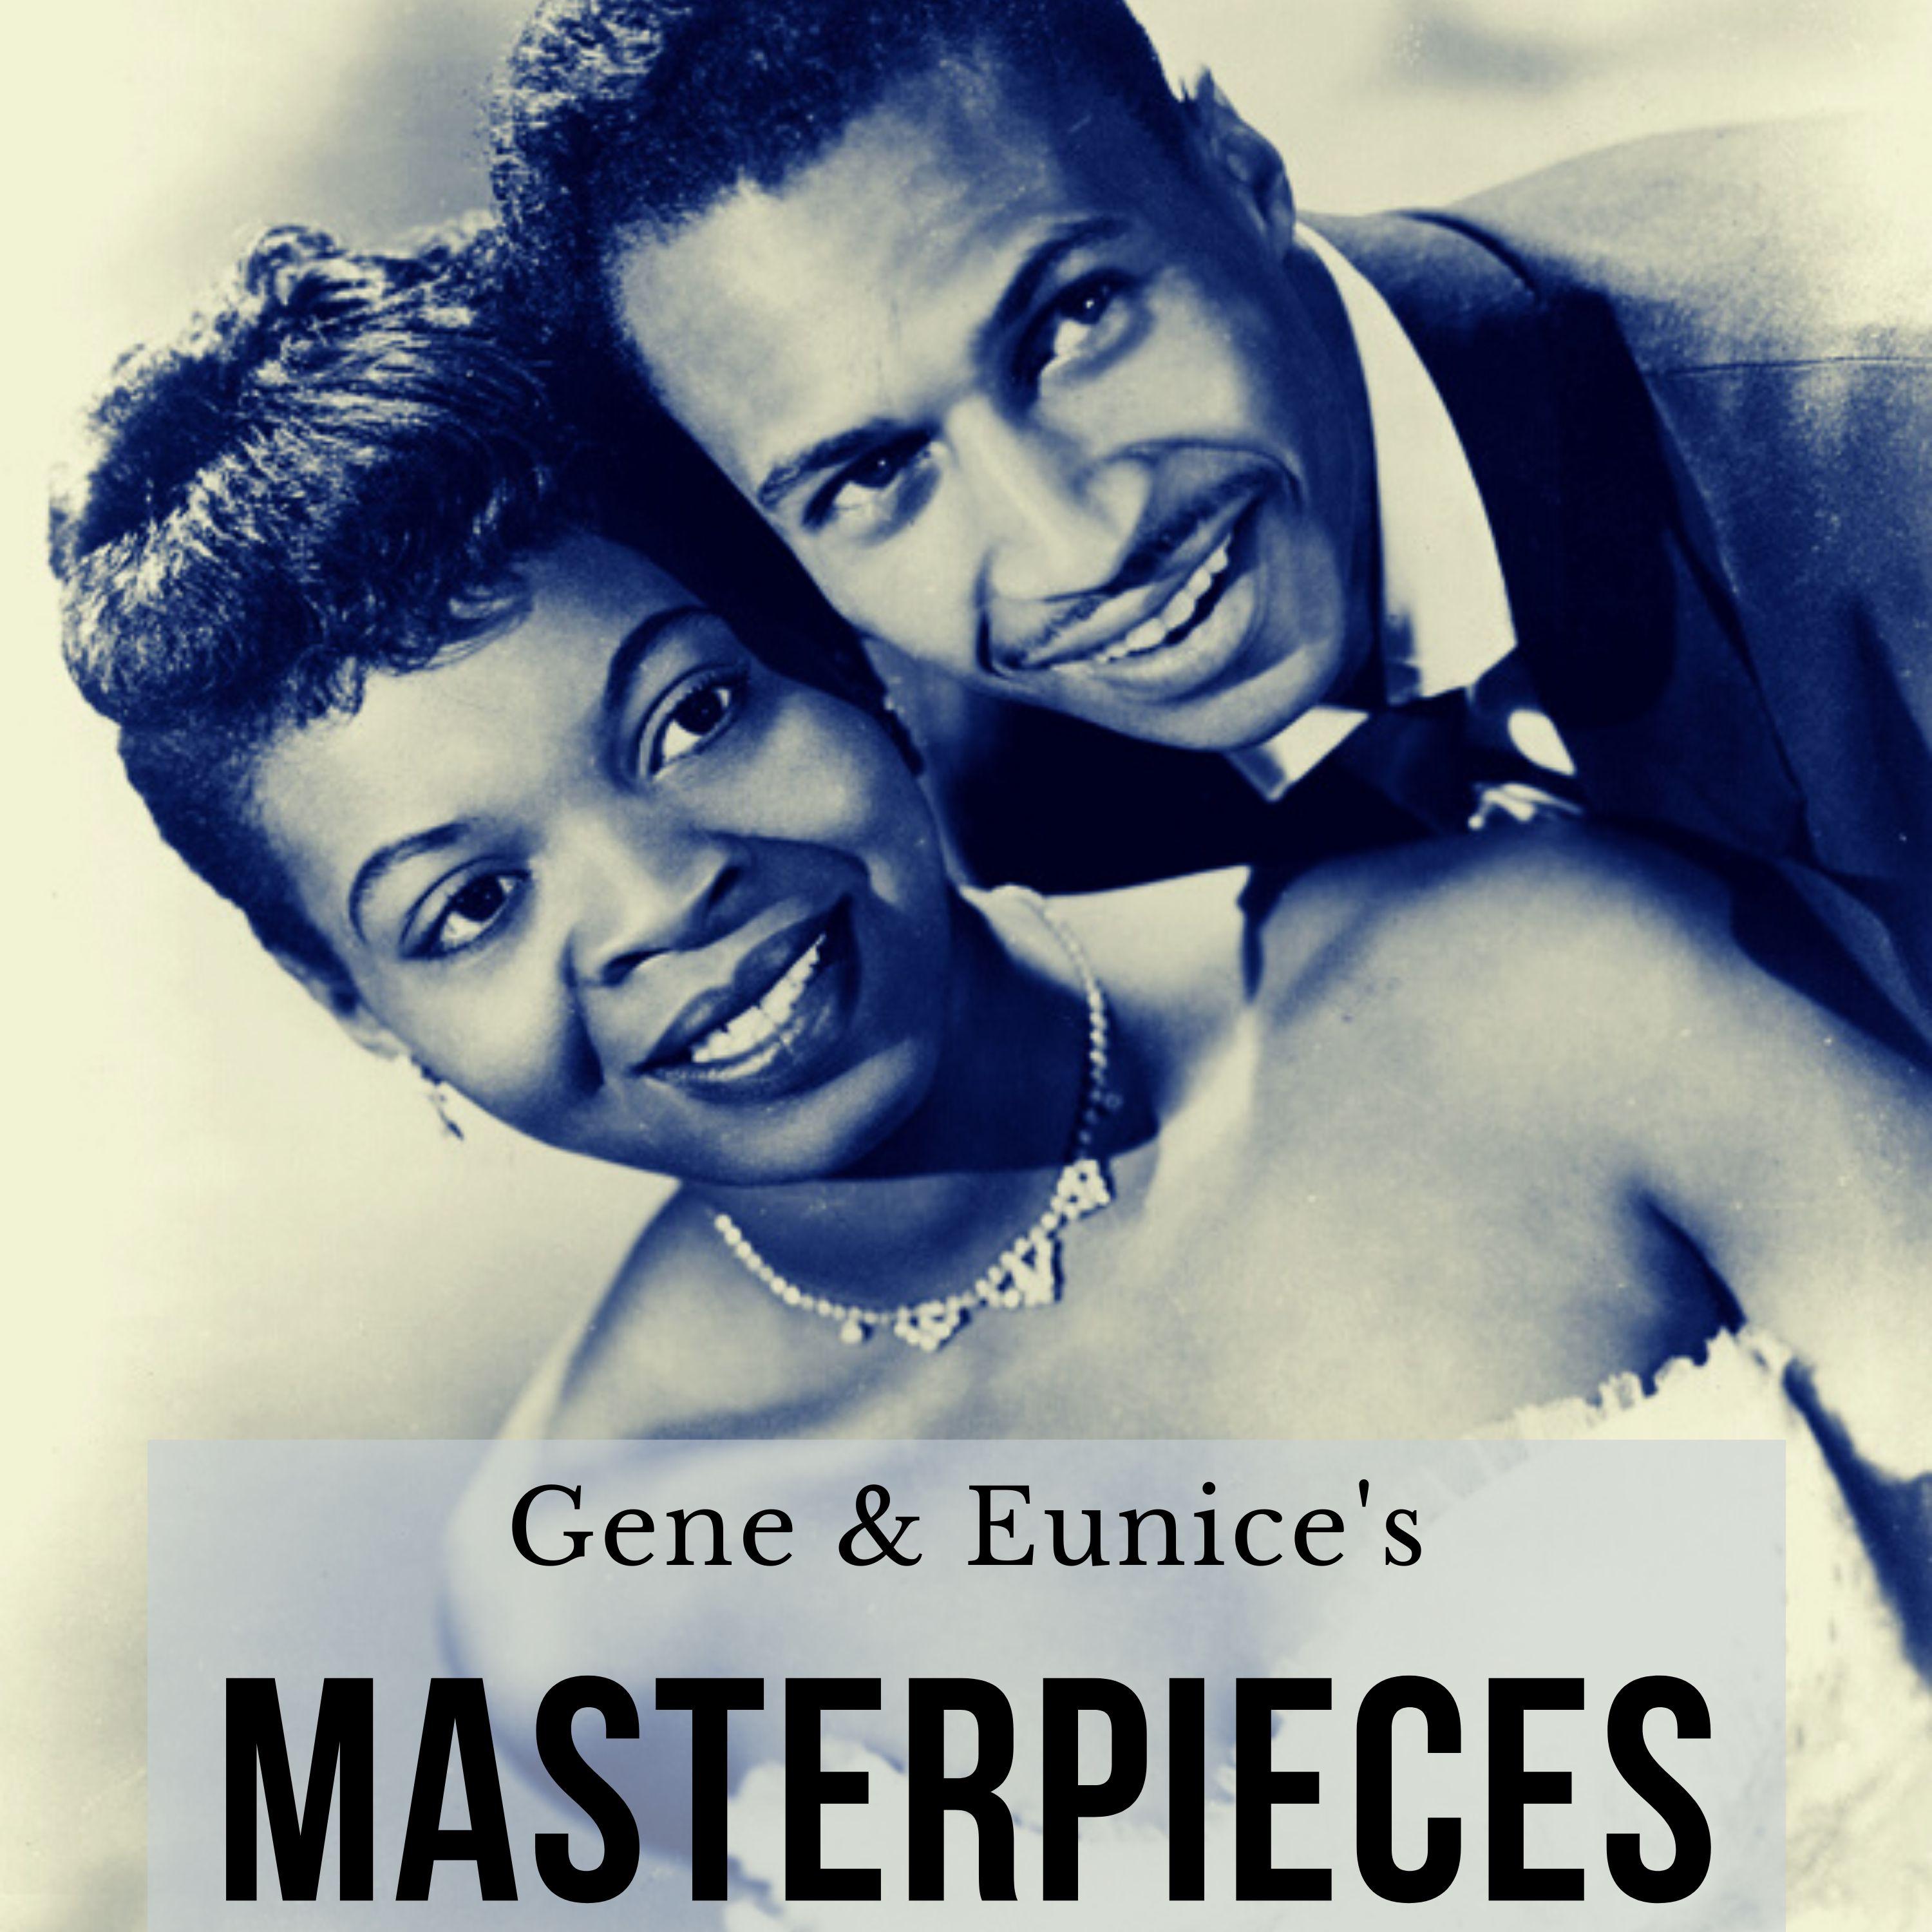 Gene & Eunice - This Is My Story